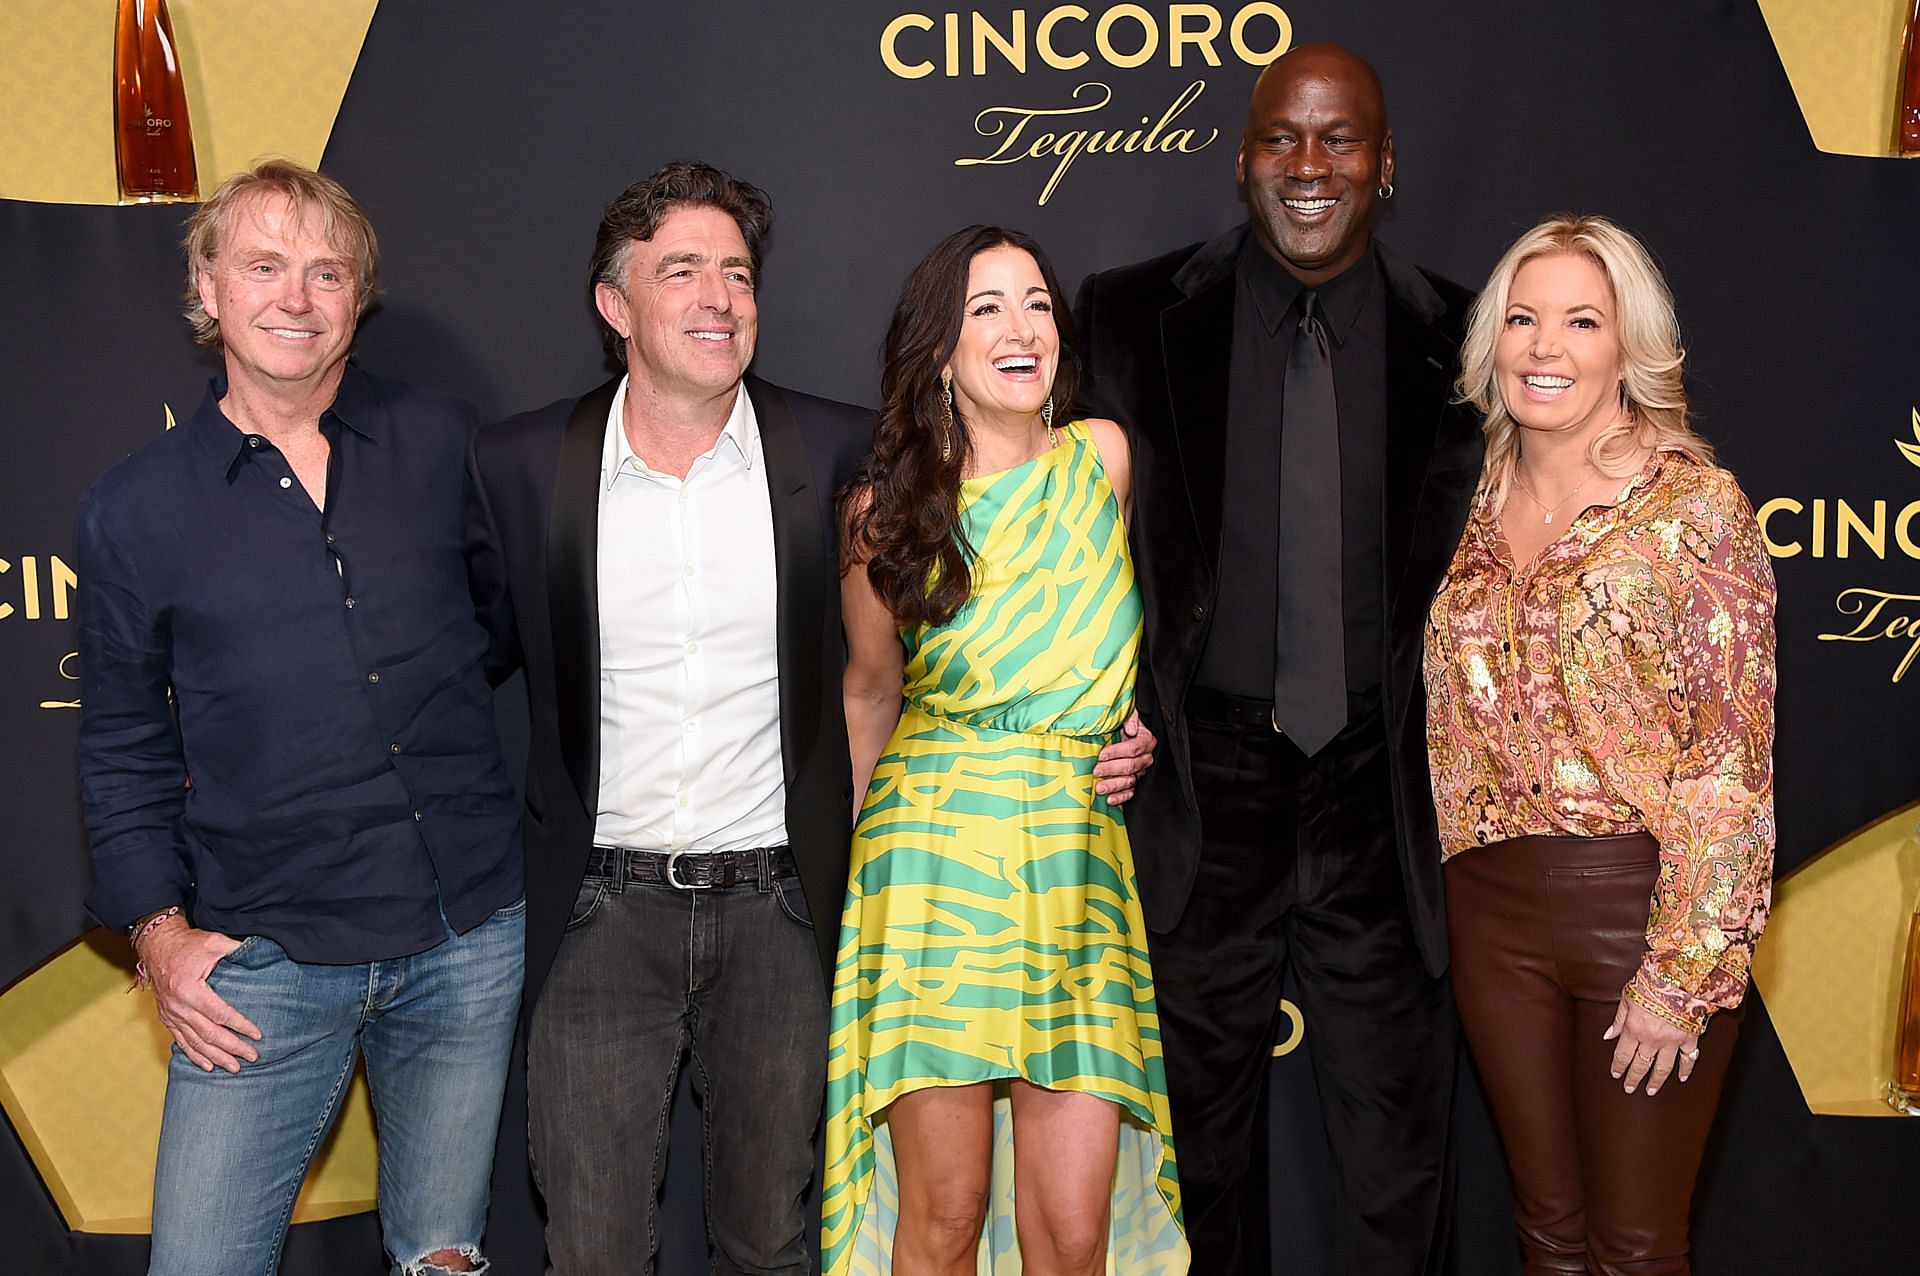 Michael Jordan and the other owners at the Cincoro Tequila Launch